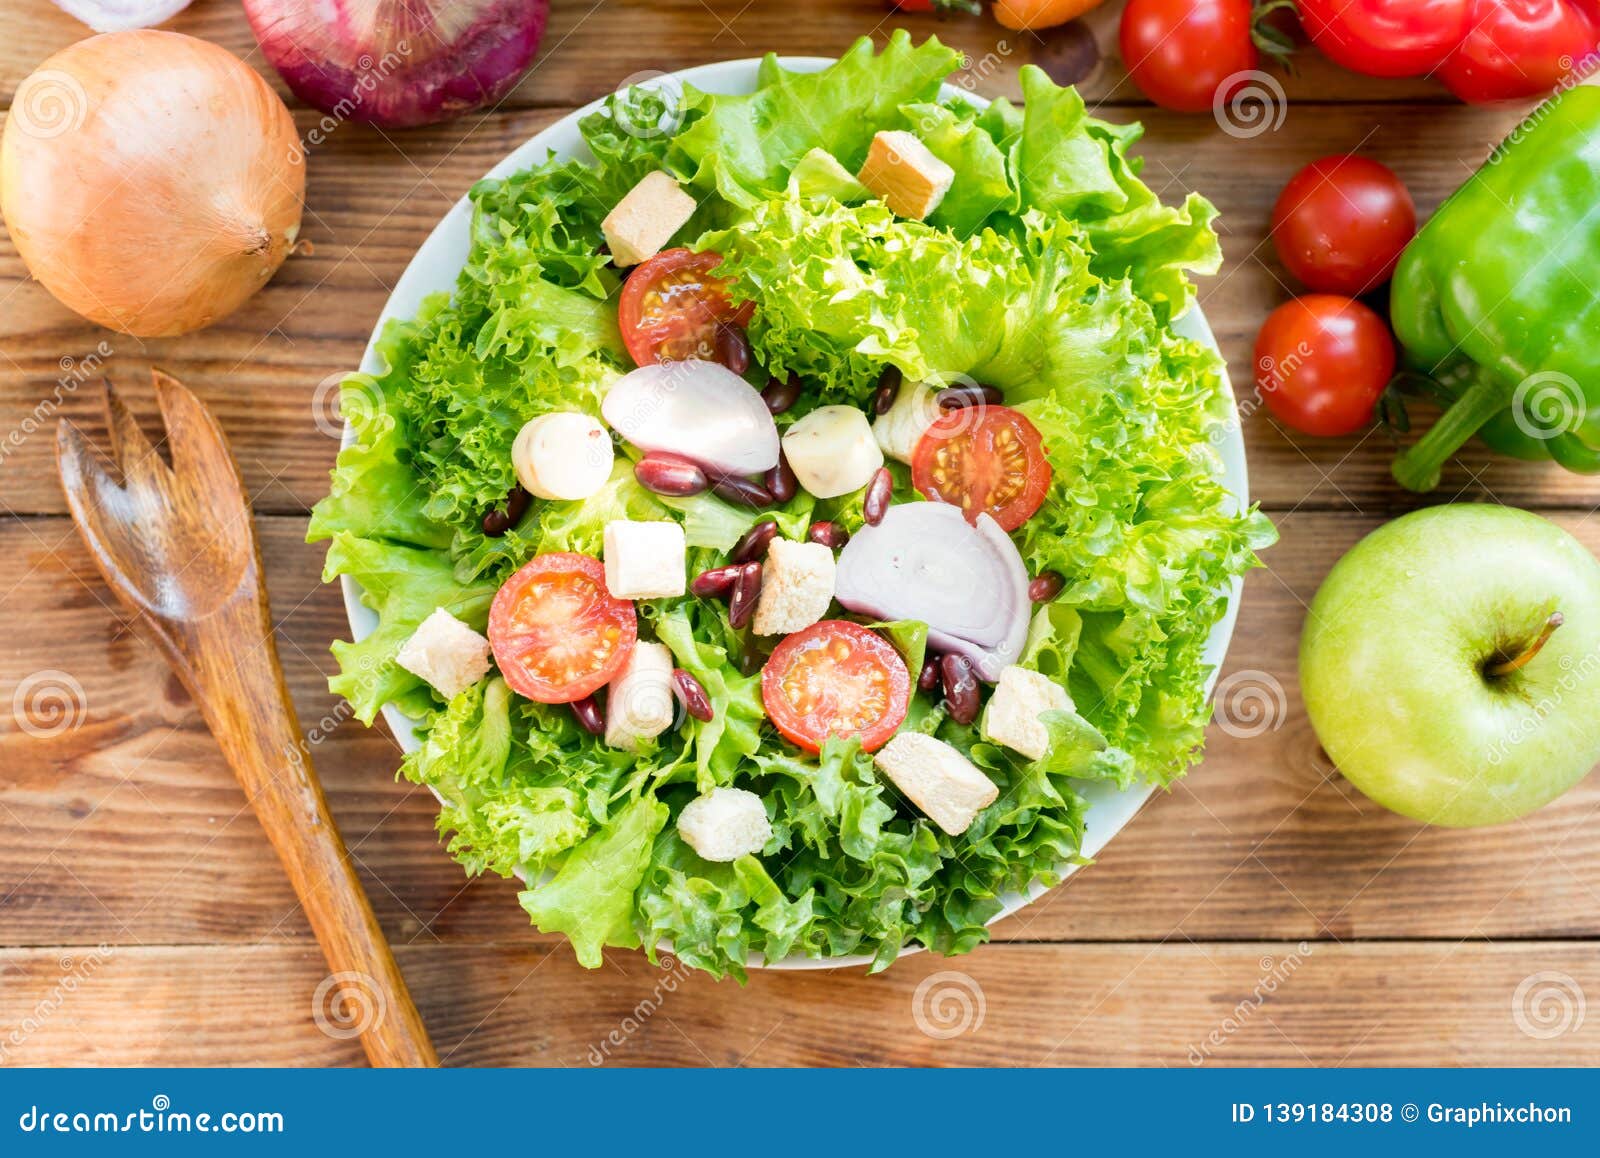 Mix Salad and Healthy. Fresh Organic Vegetables Stock Photo - Image of ...